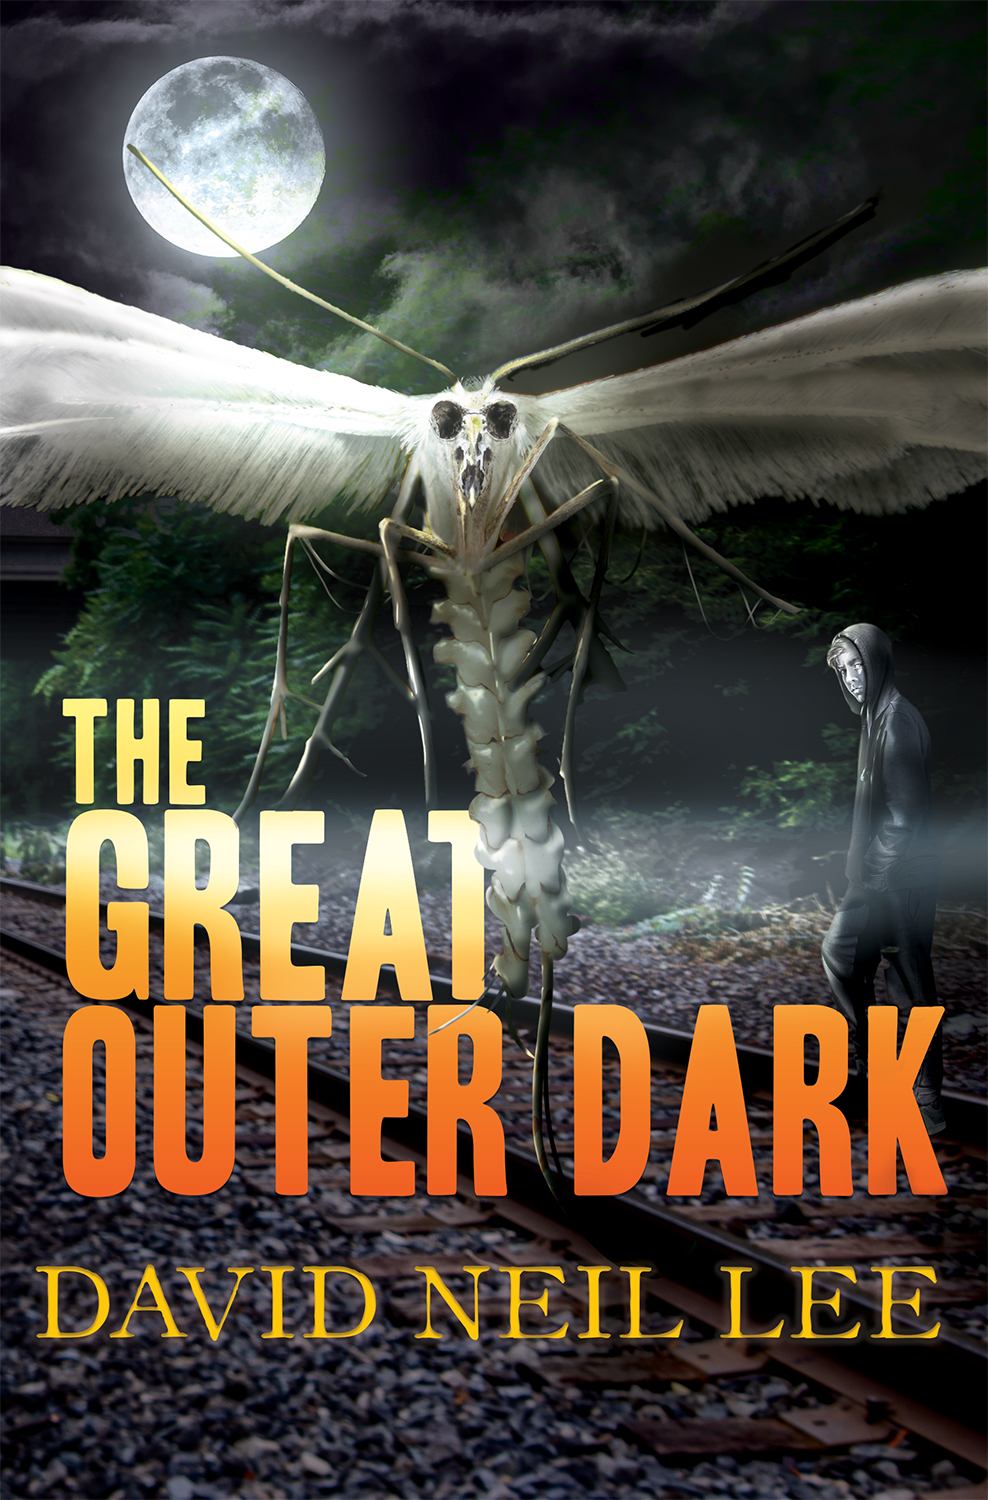 The Great Outer Dark by David Neil Lee.